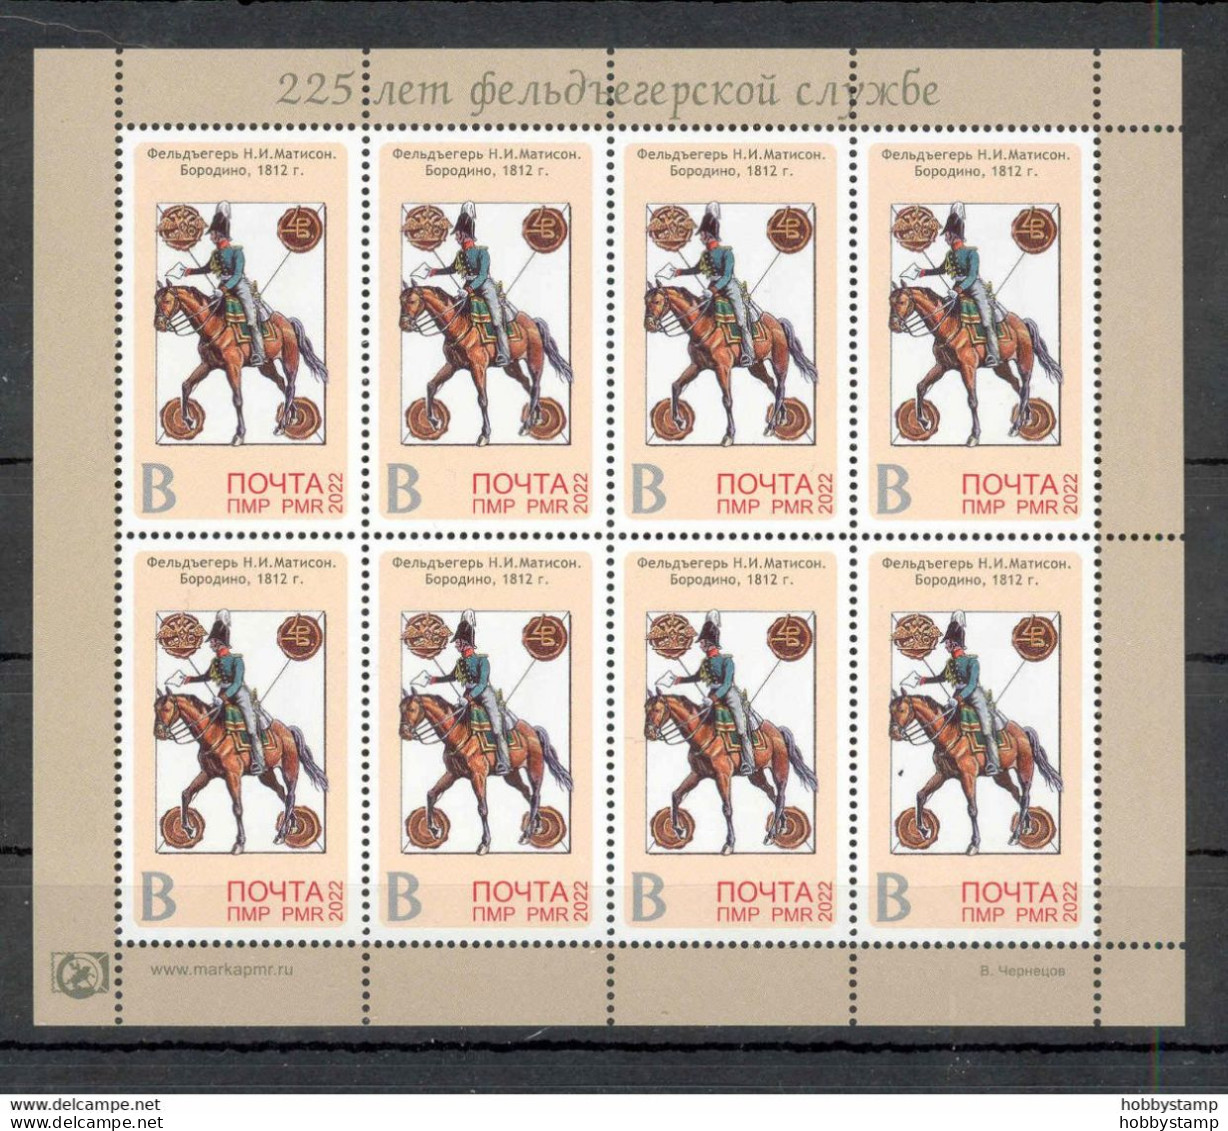 Label Transnistria 2022 225 Years Of Courier Military Service Sheetlet**MNH - Fantasy Labels